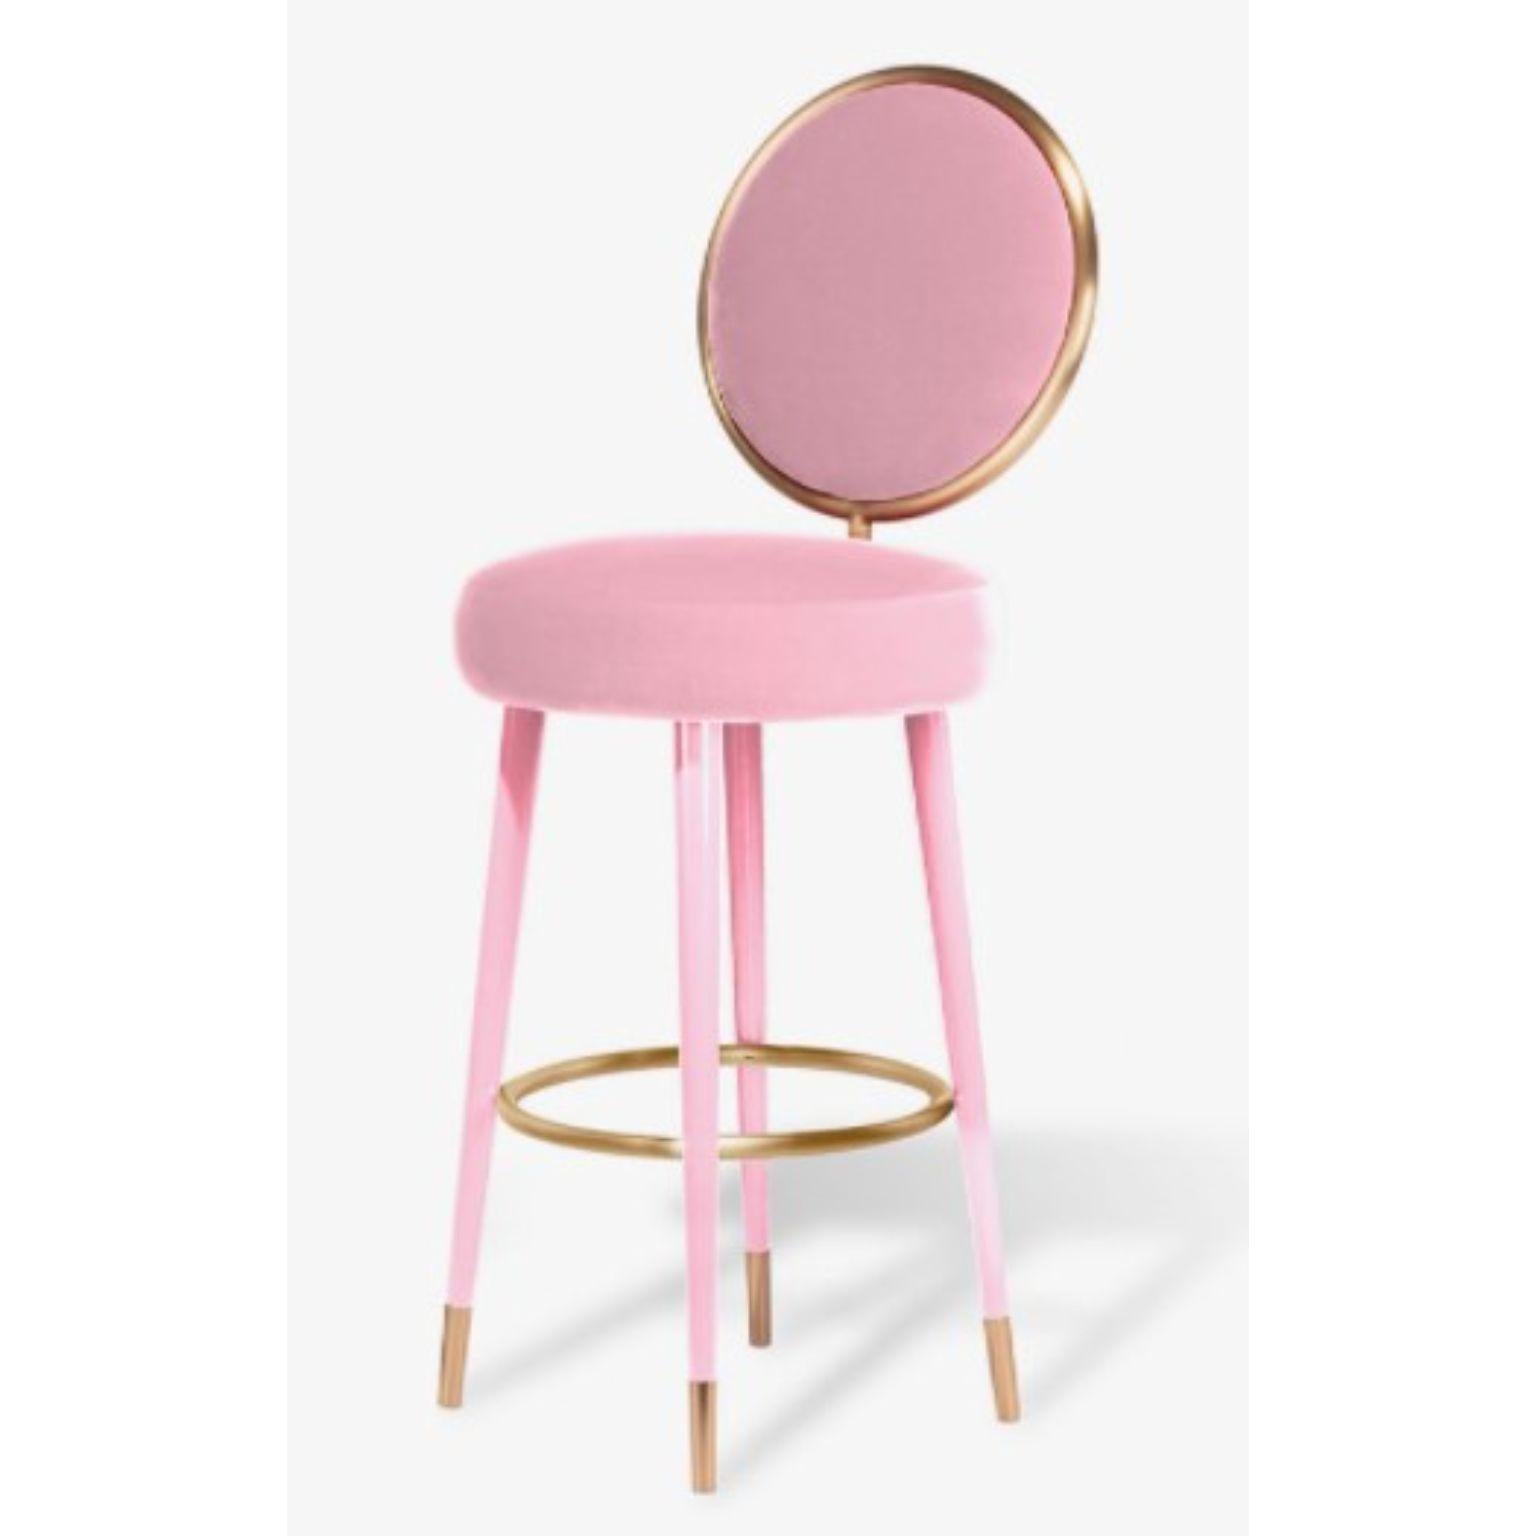 Graceful bar stool pink by Royal Stranger
Dimensions: D 48 x W 48 x H 124 cm
Materials: velvet, wood, brass.
Weight: 12 kg

FINISH OPTIONS
Upholstery Available in all Royal Stranger’s fabric collection.
Available in COM (Client’s Own